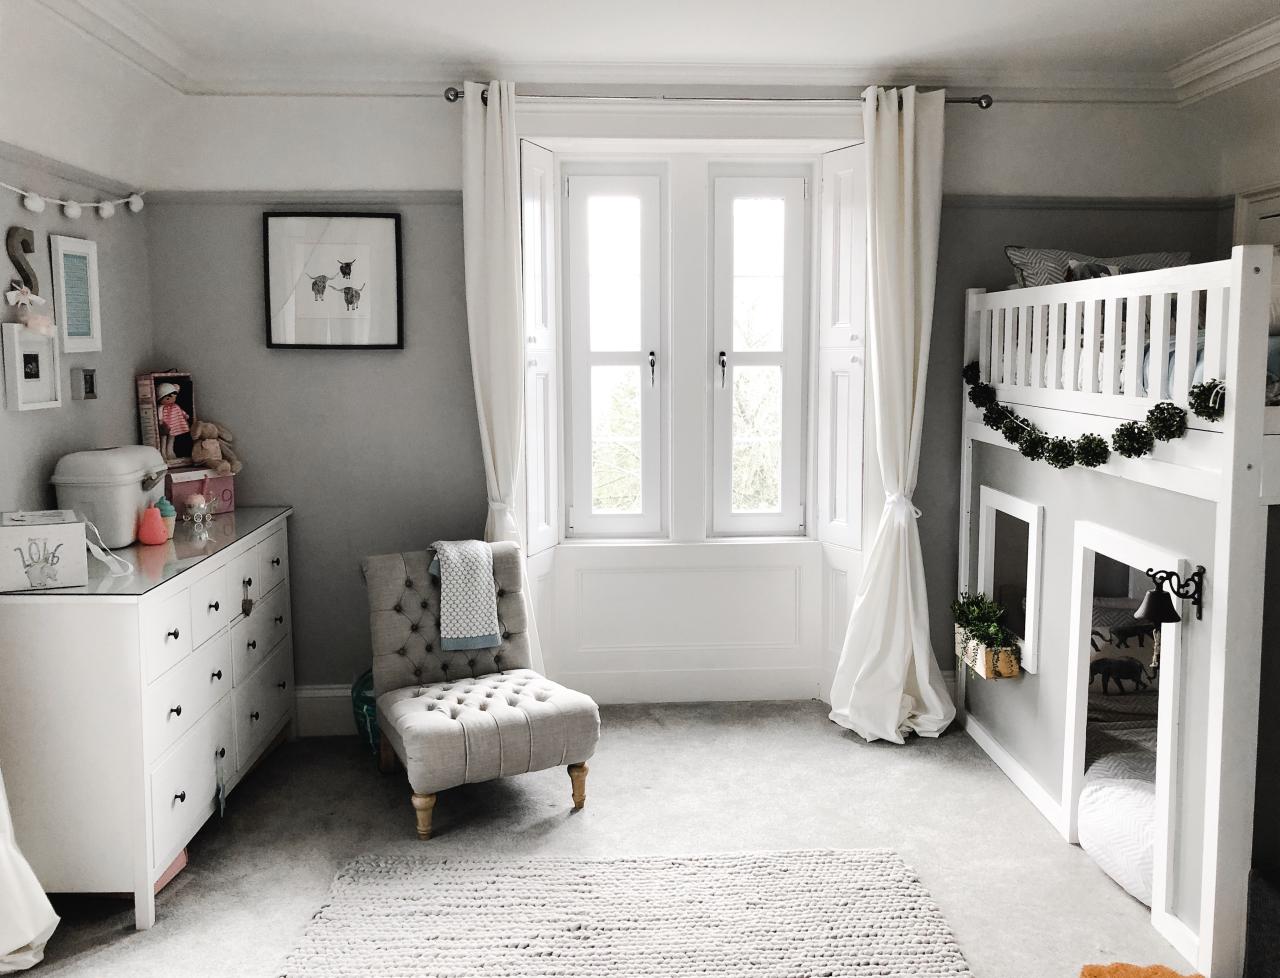 Nursery neutral bedroom kids gender baby room rooms walls decor inspiration kid win awesome wallpaper over nurseries modern spaces moroccan